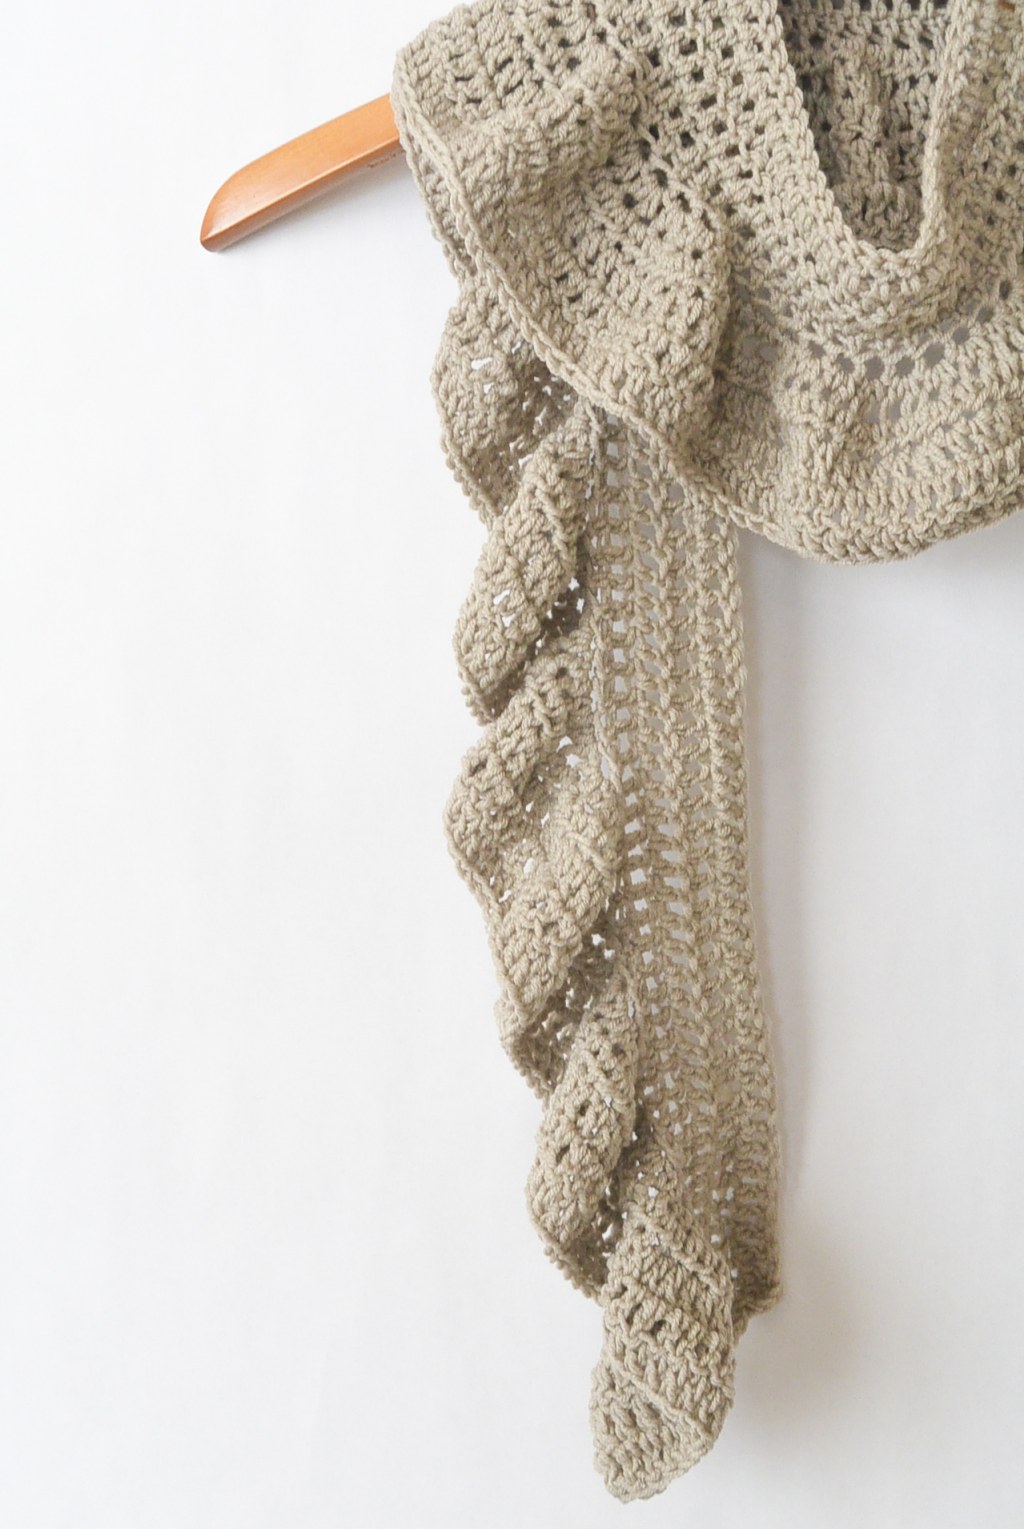 Picture of: Merino Crocheted Ruffle Scarf Pattern – Mama In A Stitch